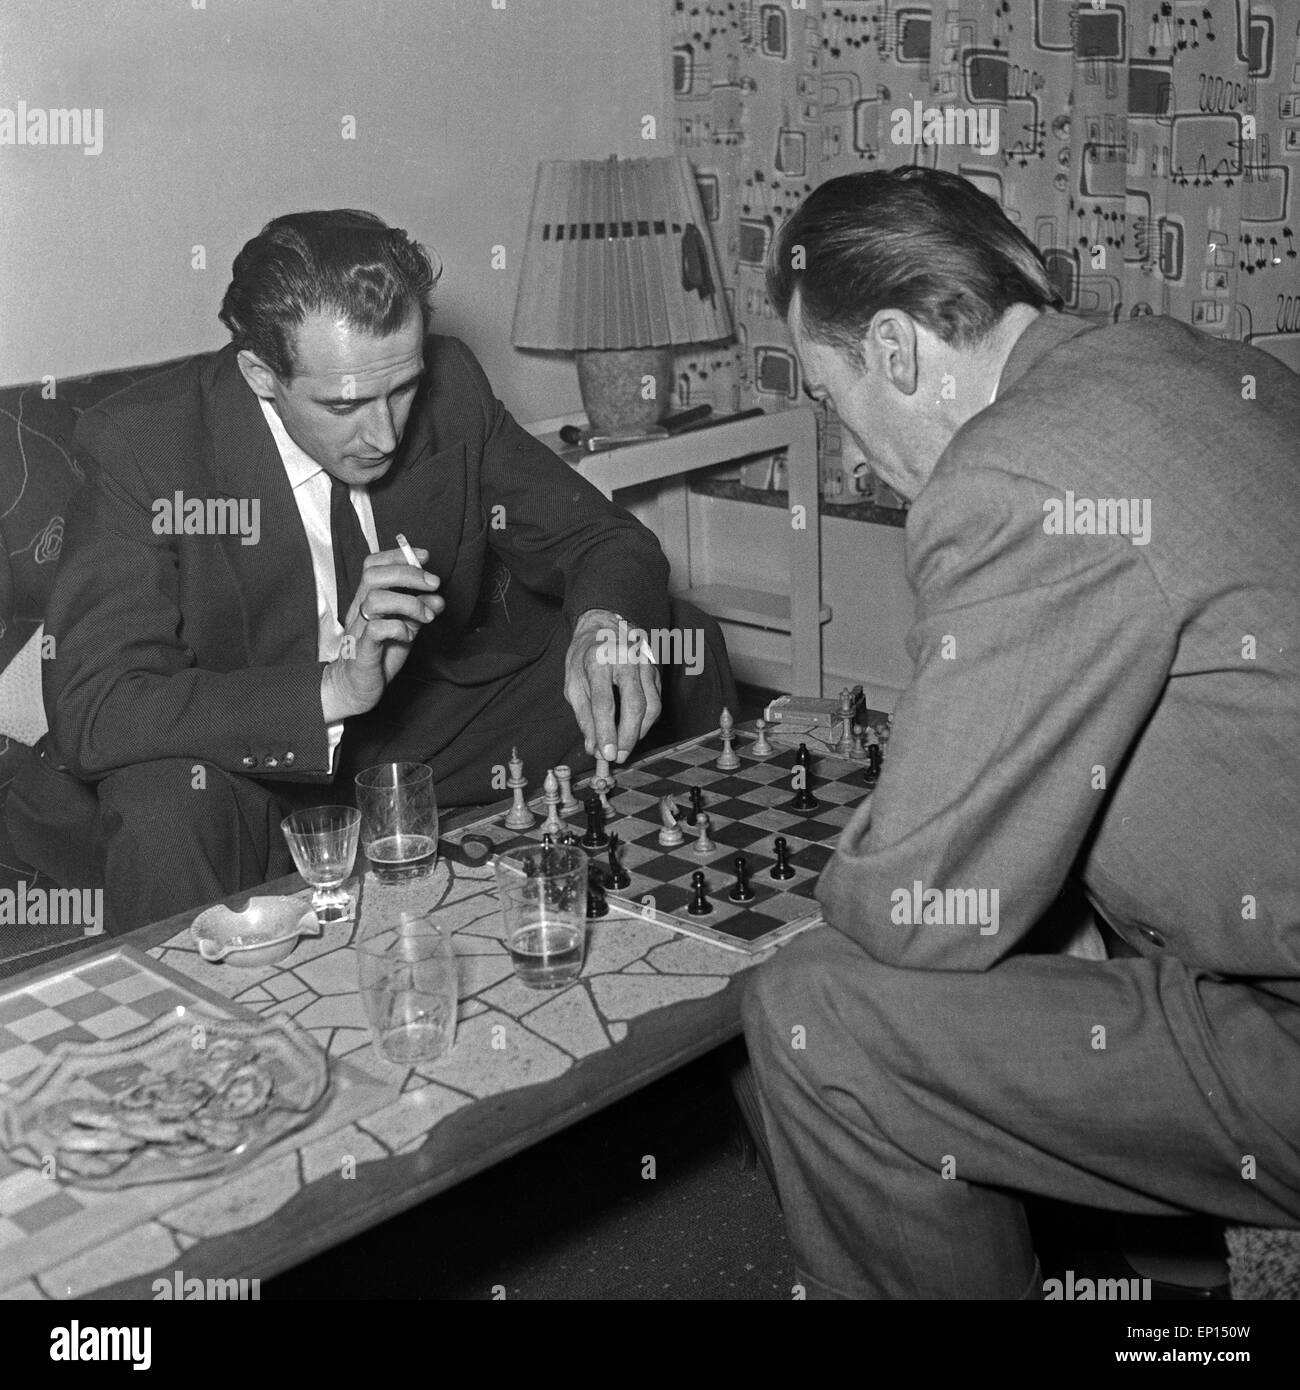 Two men playing chess Black and White Stock Photos & Images - Alamy